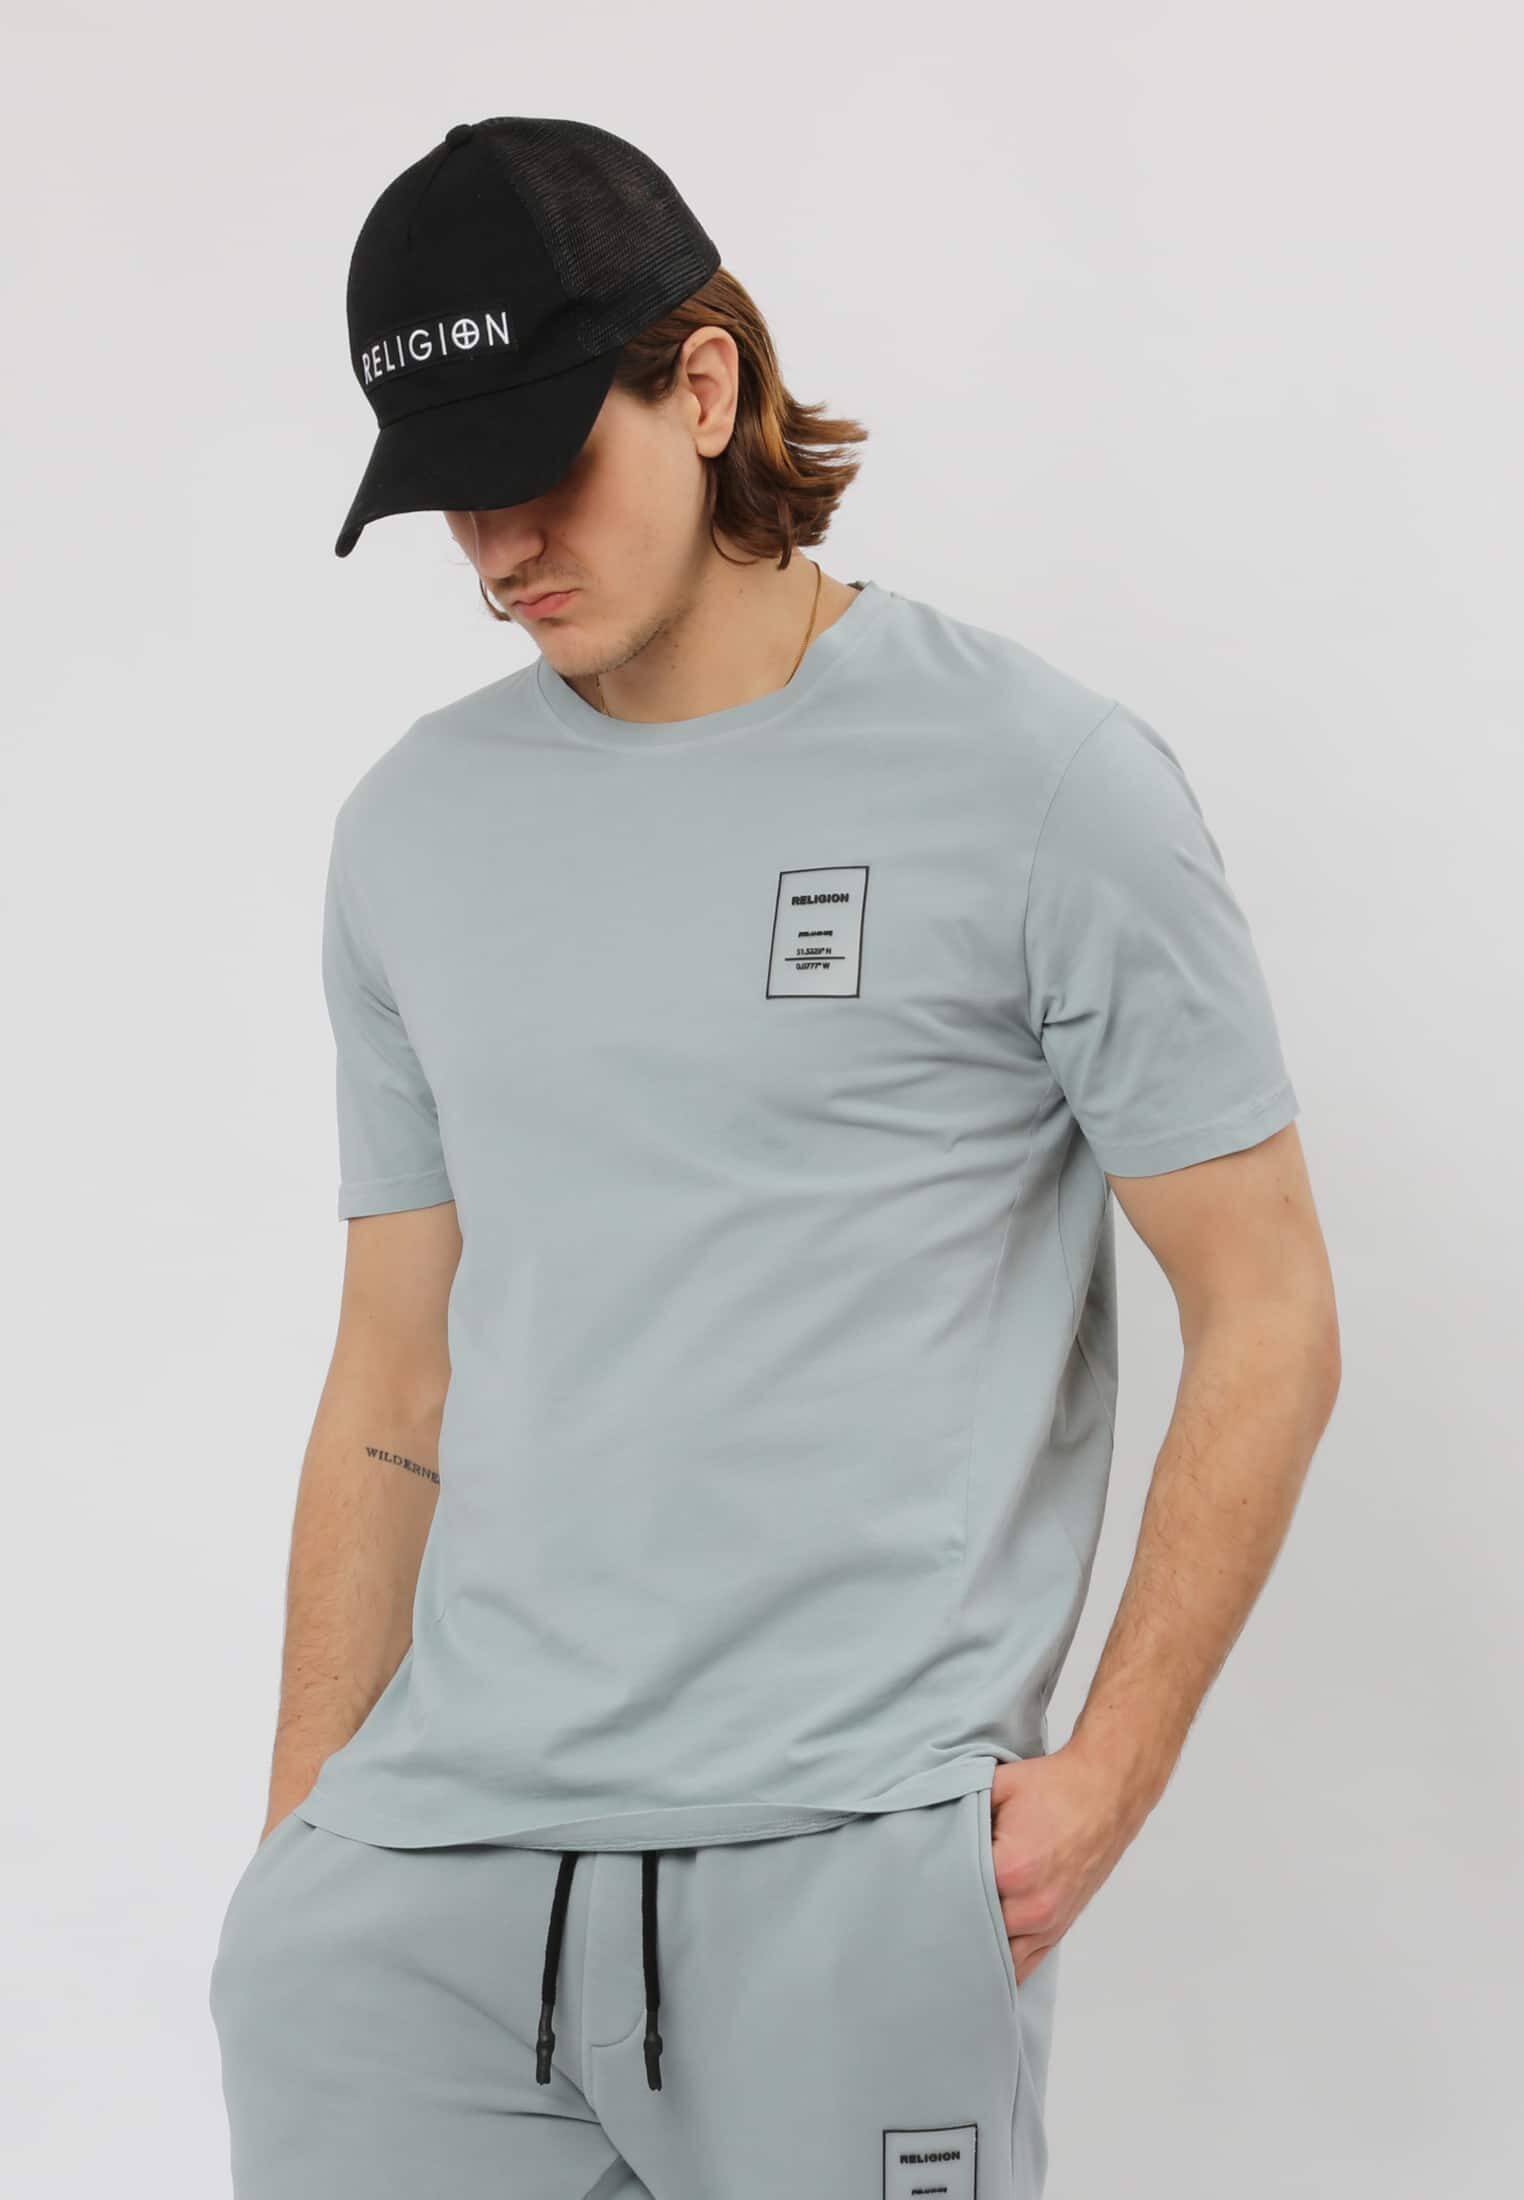 TAG T-SHIRT -WASHED HIGH RISE GREY